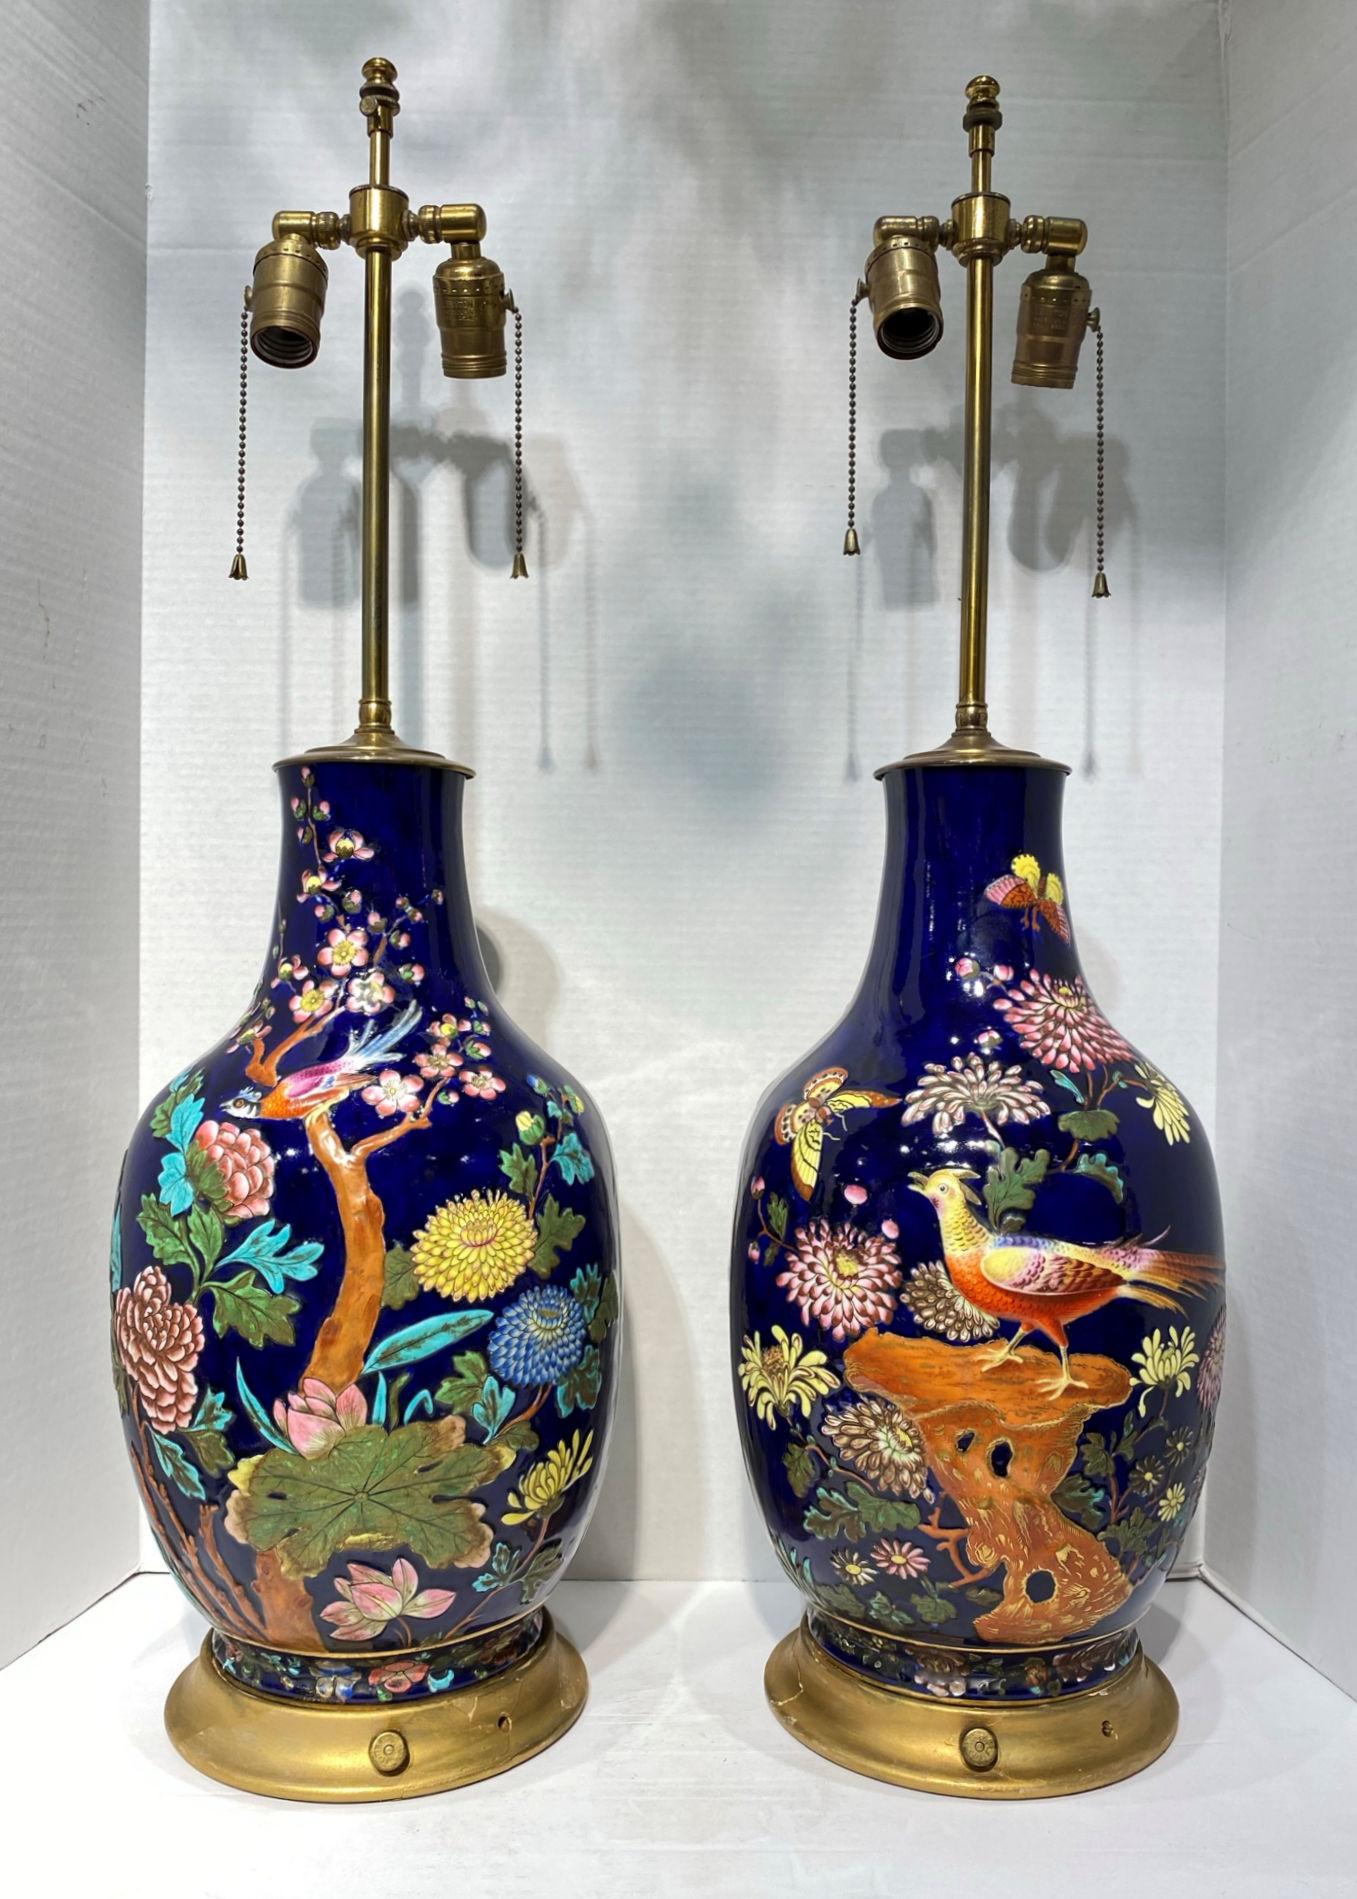 Pair of late 19th century colorful enameled porcelain table Lamps with bird, flowers and butterfly motifs.
The decorations are raised and two dimensional. Extremely nice quality painting.
The porcelain vases could be French or English.